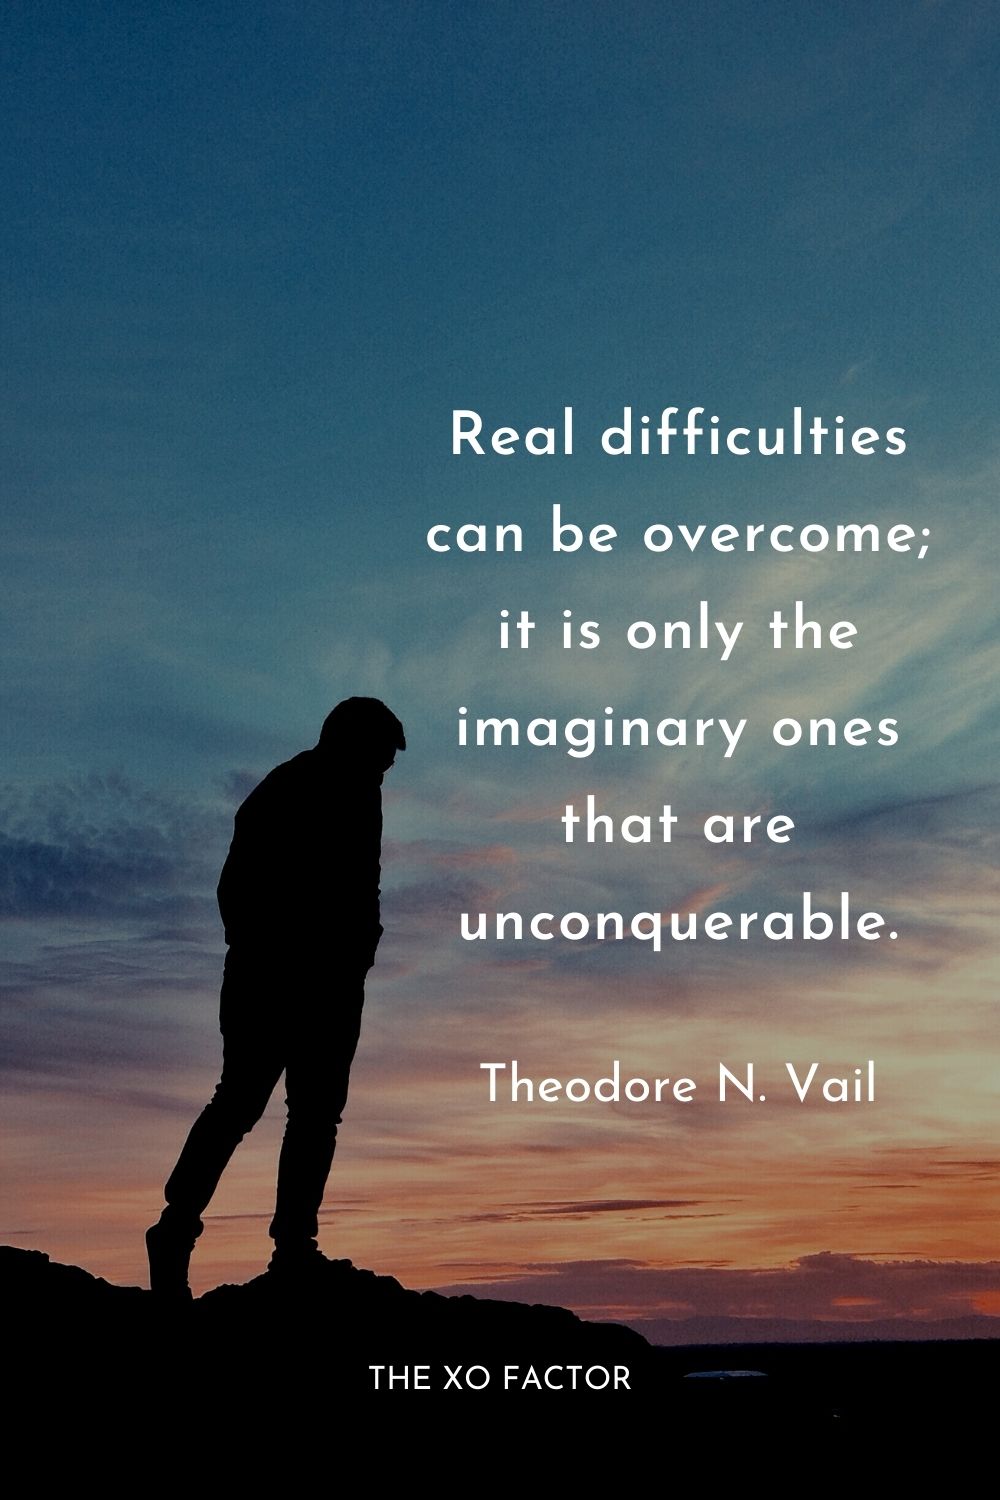 Real difficulties can be overcome; it is only the imaginary ones that are unconquerable.